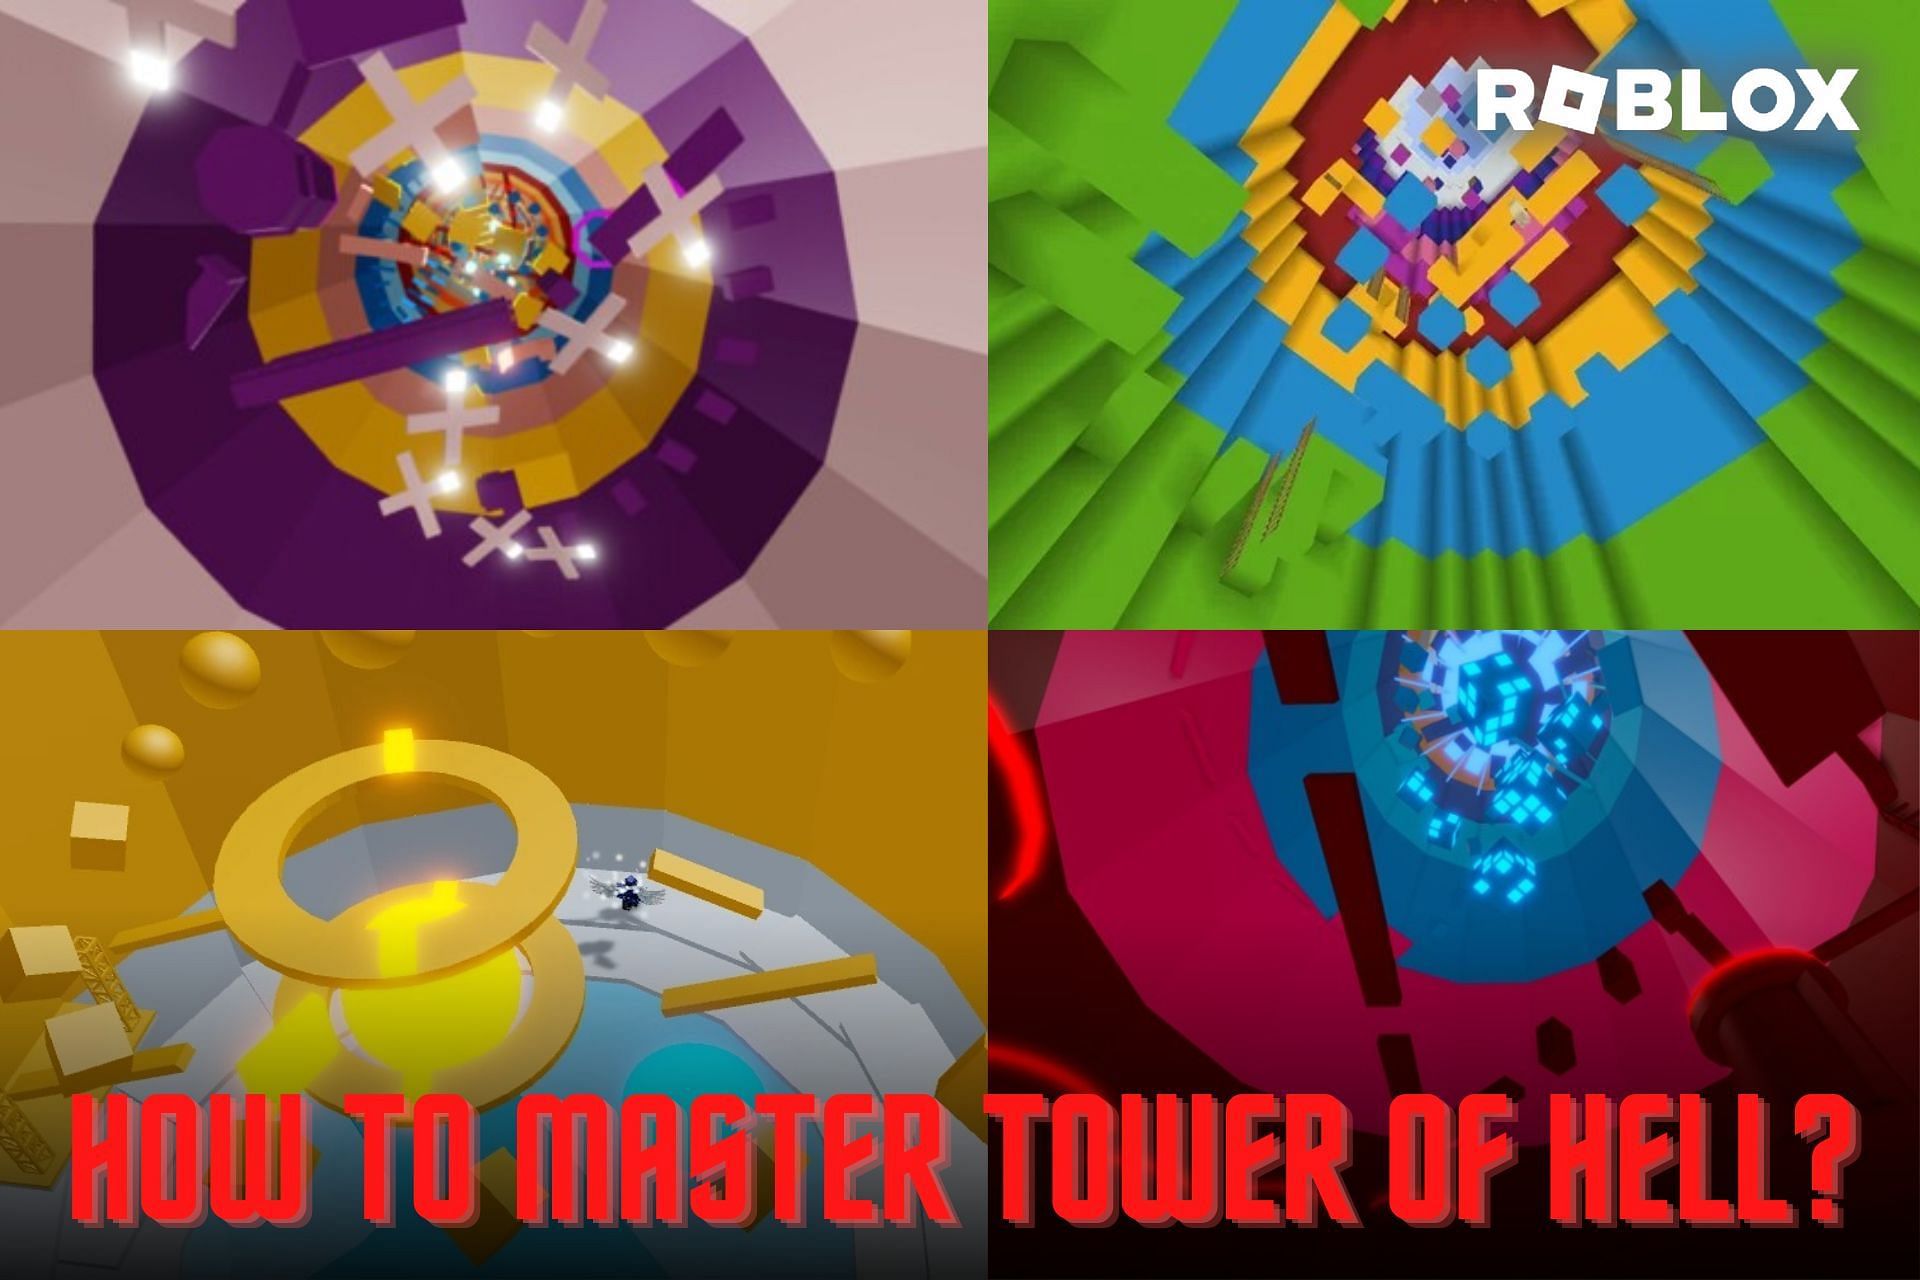 Tower of Hell - Roblox